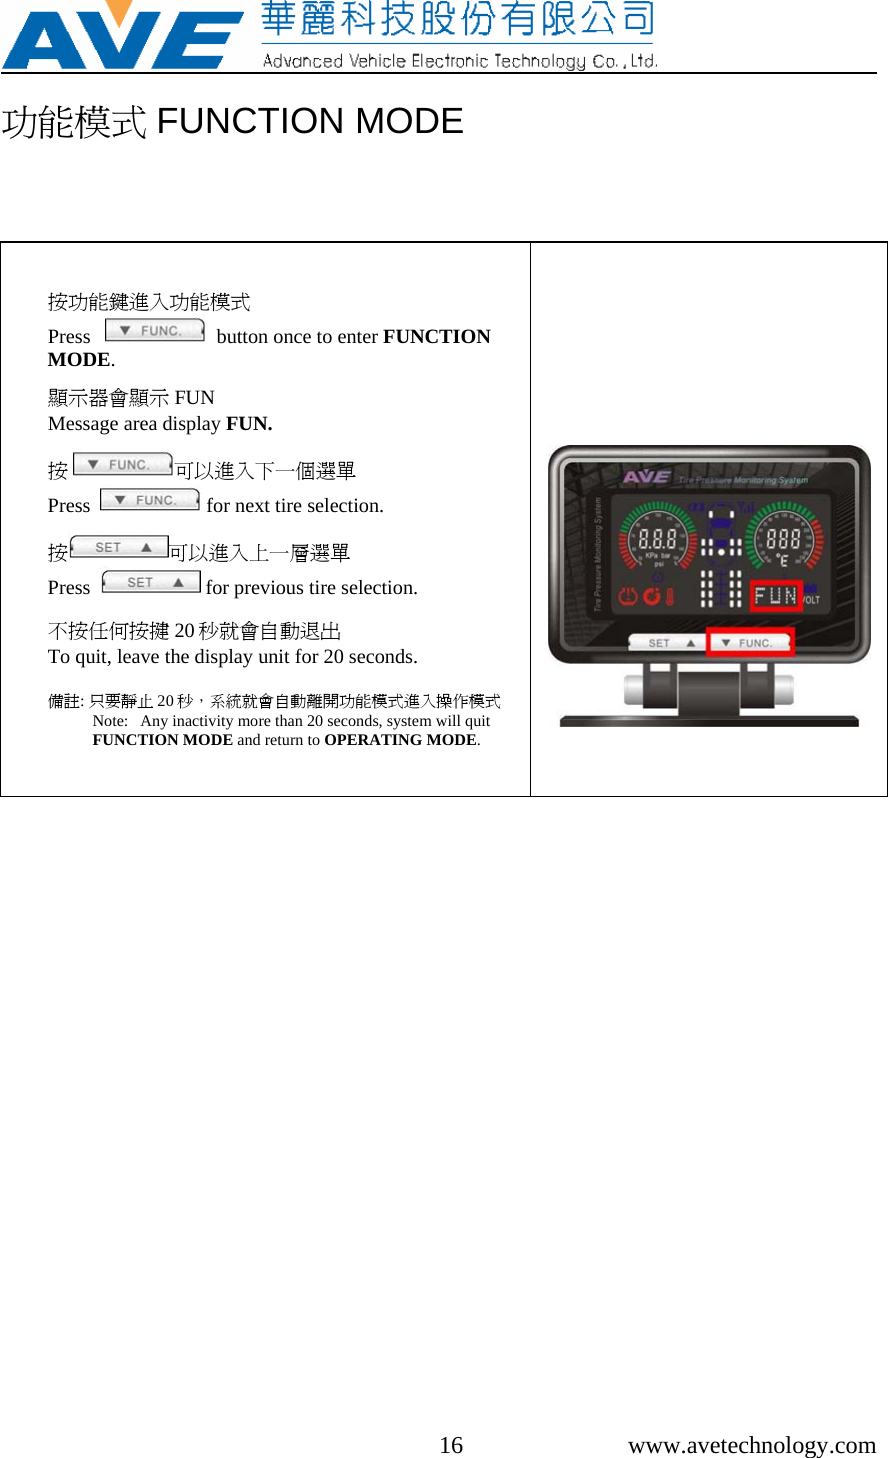     16 www.avetechnology.com 功能模式 FUNCTION MODE   按功能鍵進入功能模式 Press      button once to enter FUNCTION MODE.  顯示器會顯示 FUN Message area display FUN.  按 可以進入下一個選單 Press    for next tire selection.  按可以進入上一層選單 Press    for previous tire selection.  不按任何按揵 20 秒就會自動退出 To quit, leave the display unit for 20 seconds.  備註: 只要靜止 20 秒，系統就會自動離開功能模式進入操作模式Note:   Any inactivity more than 20 seconds, system will quit FUNCTION MODE and return to OPERATING MODE.        